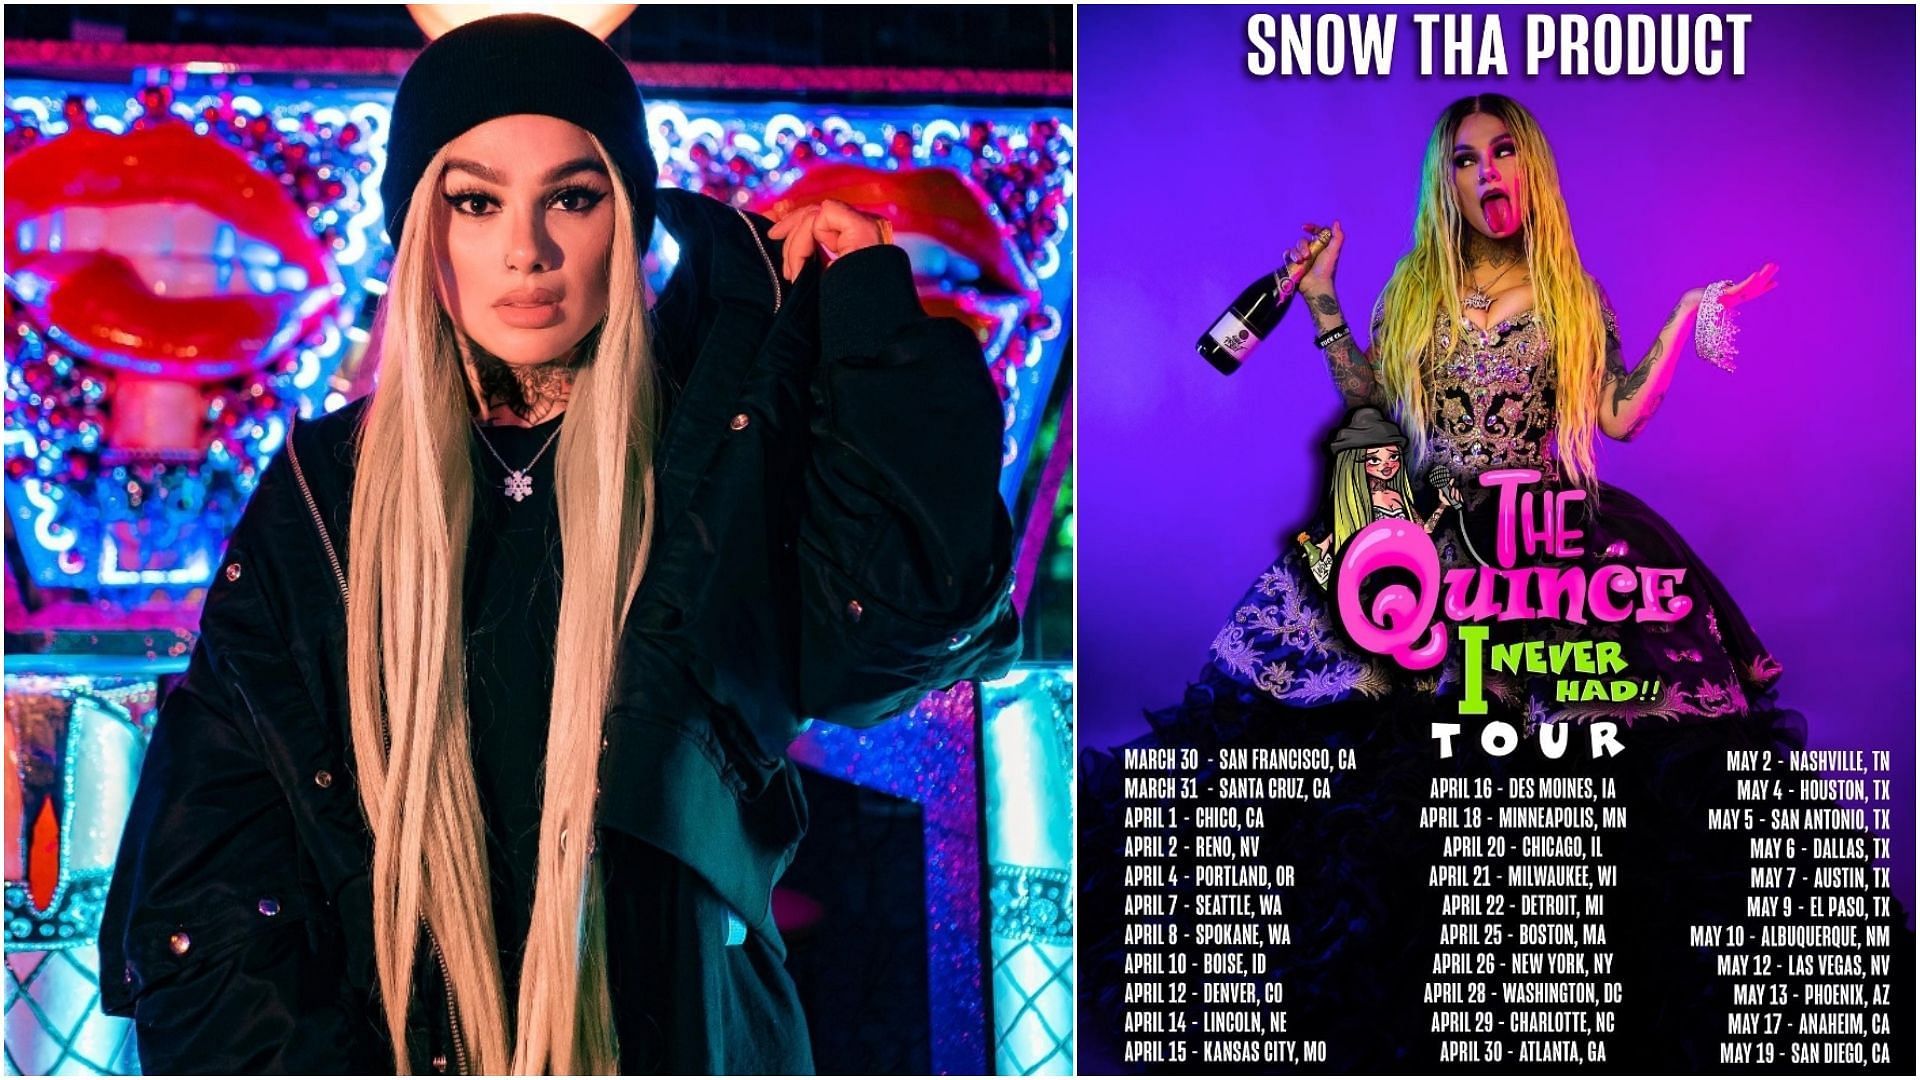 who is snow tha product on tour with